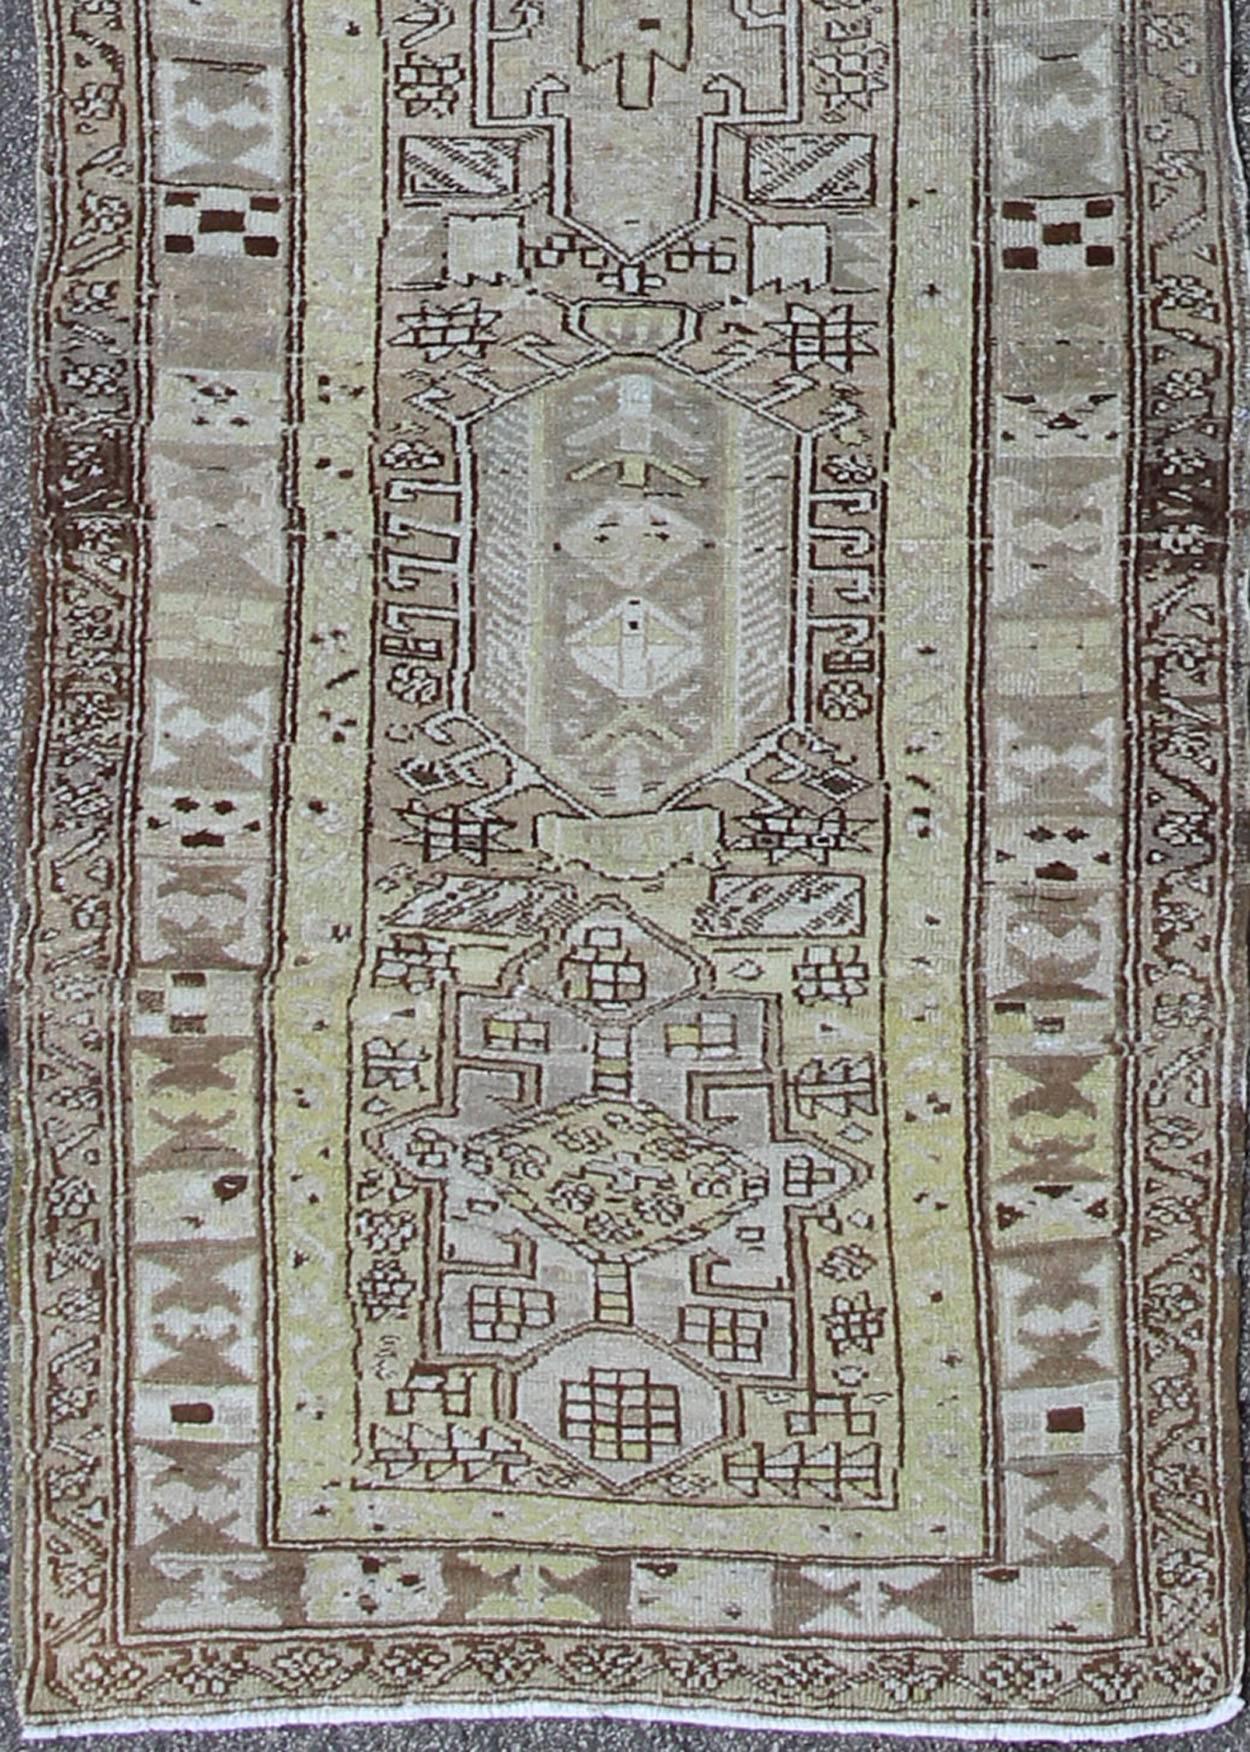 Long Antique Heriz Runner, rug /CA-2440, country of origin / type: Persia / Heriz, circa 1930.
This magnificent antique long Heriz runner from the early 20th Century bears an exquisite design rendered in gorgeous hues of taupe, gray, and olive.